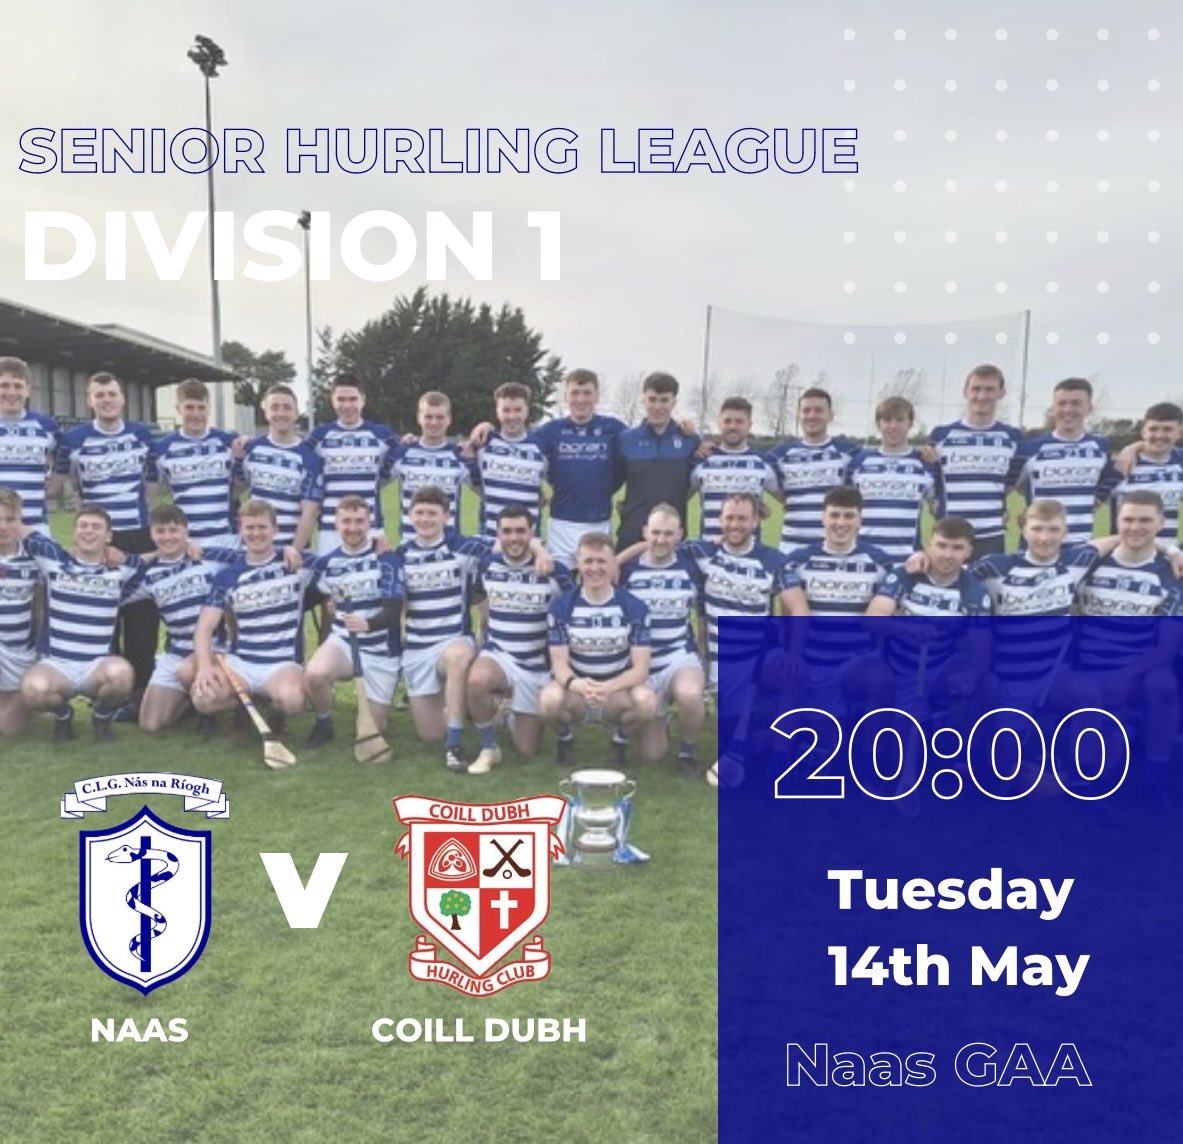 All support greatly appreciated by our Senior A hurlers in their league game this evening